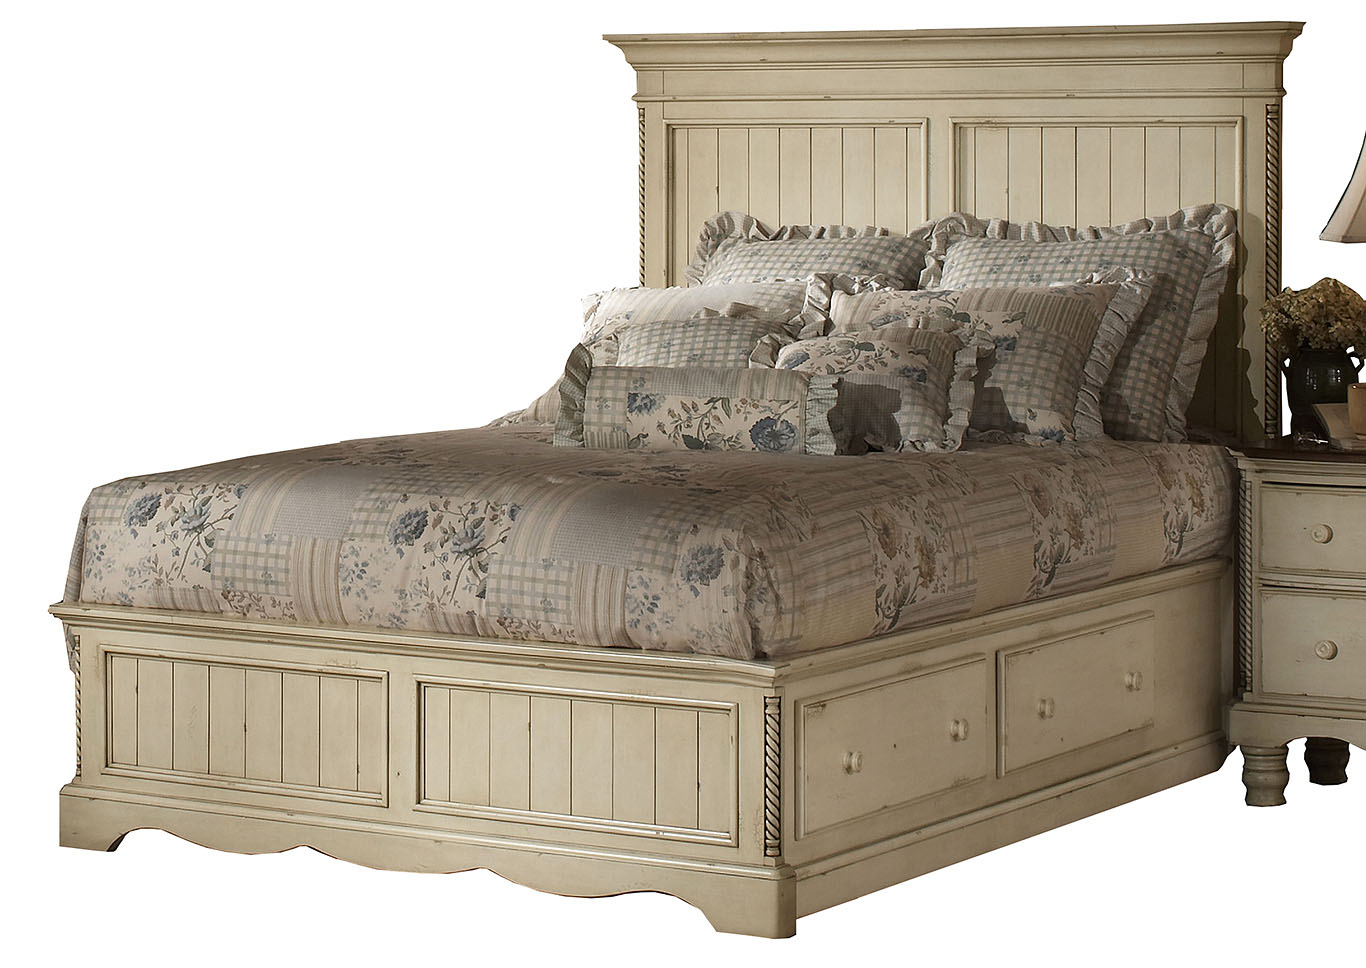 Squan Furniture Wilshire Panel Queen Bed Wrails Storage Base within sizing 1366 X 968